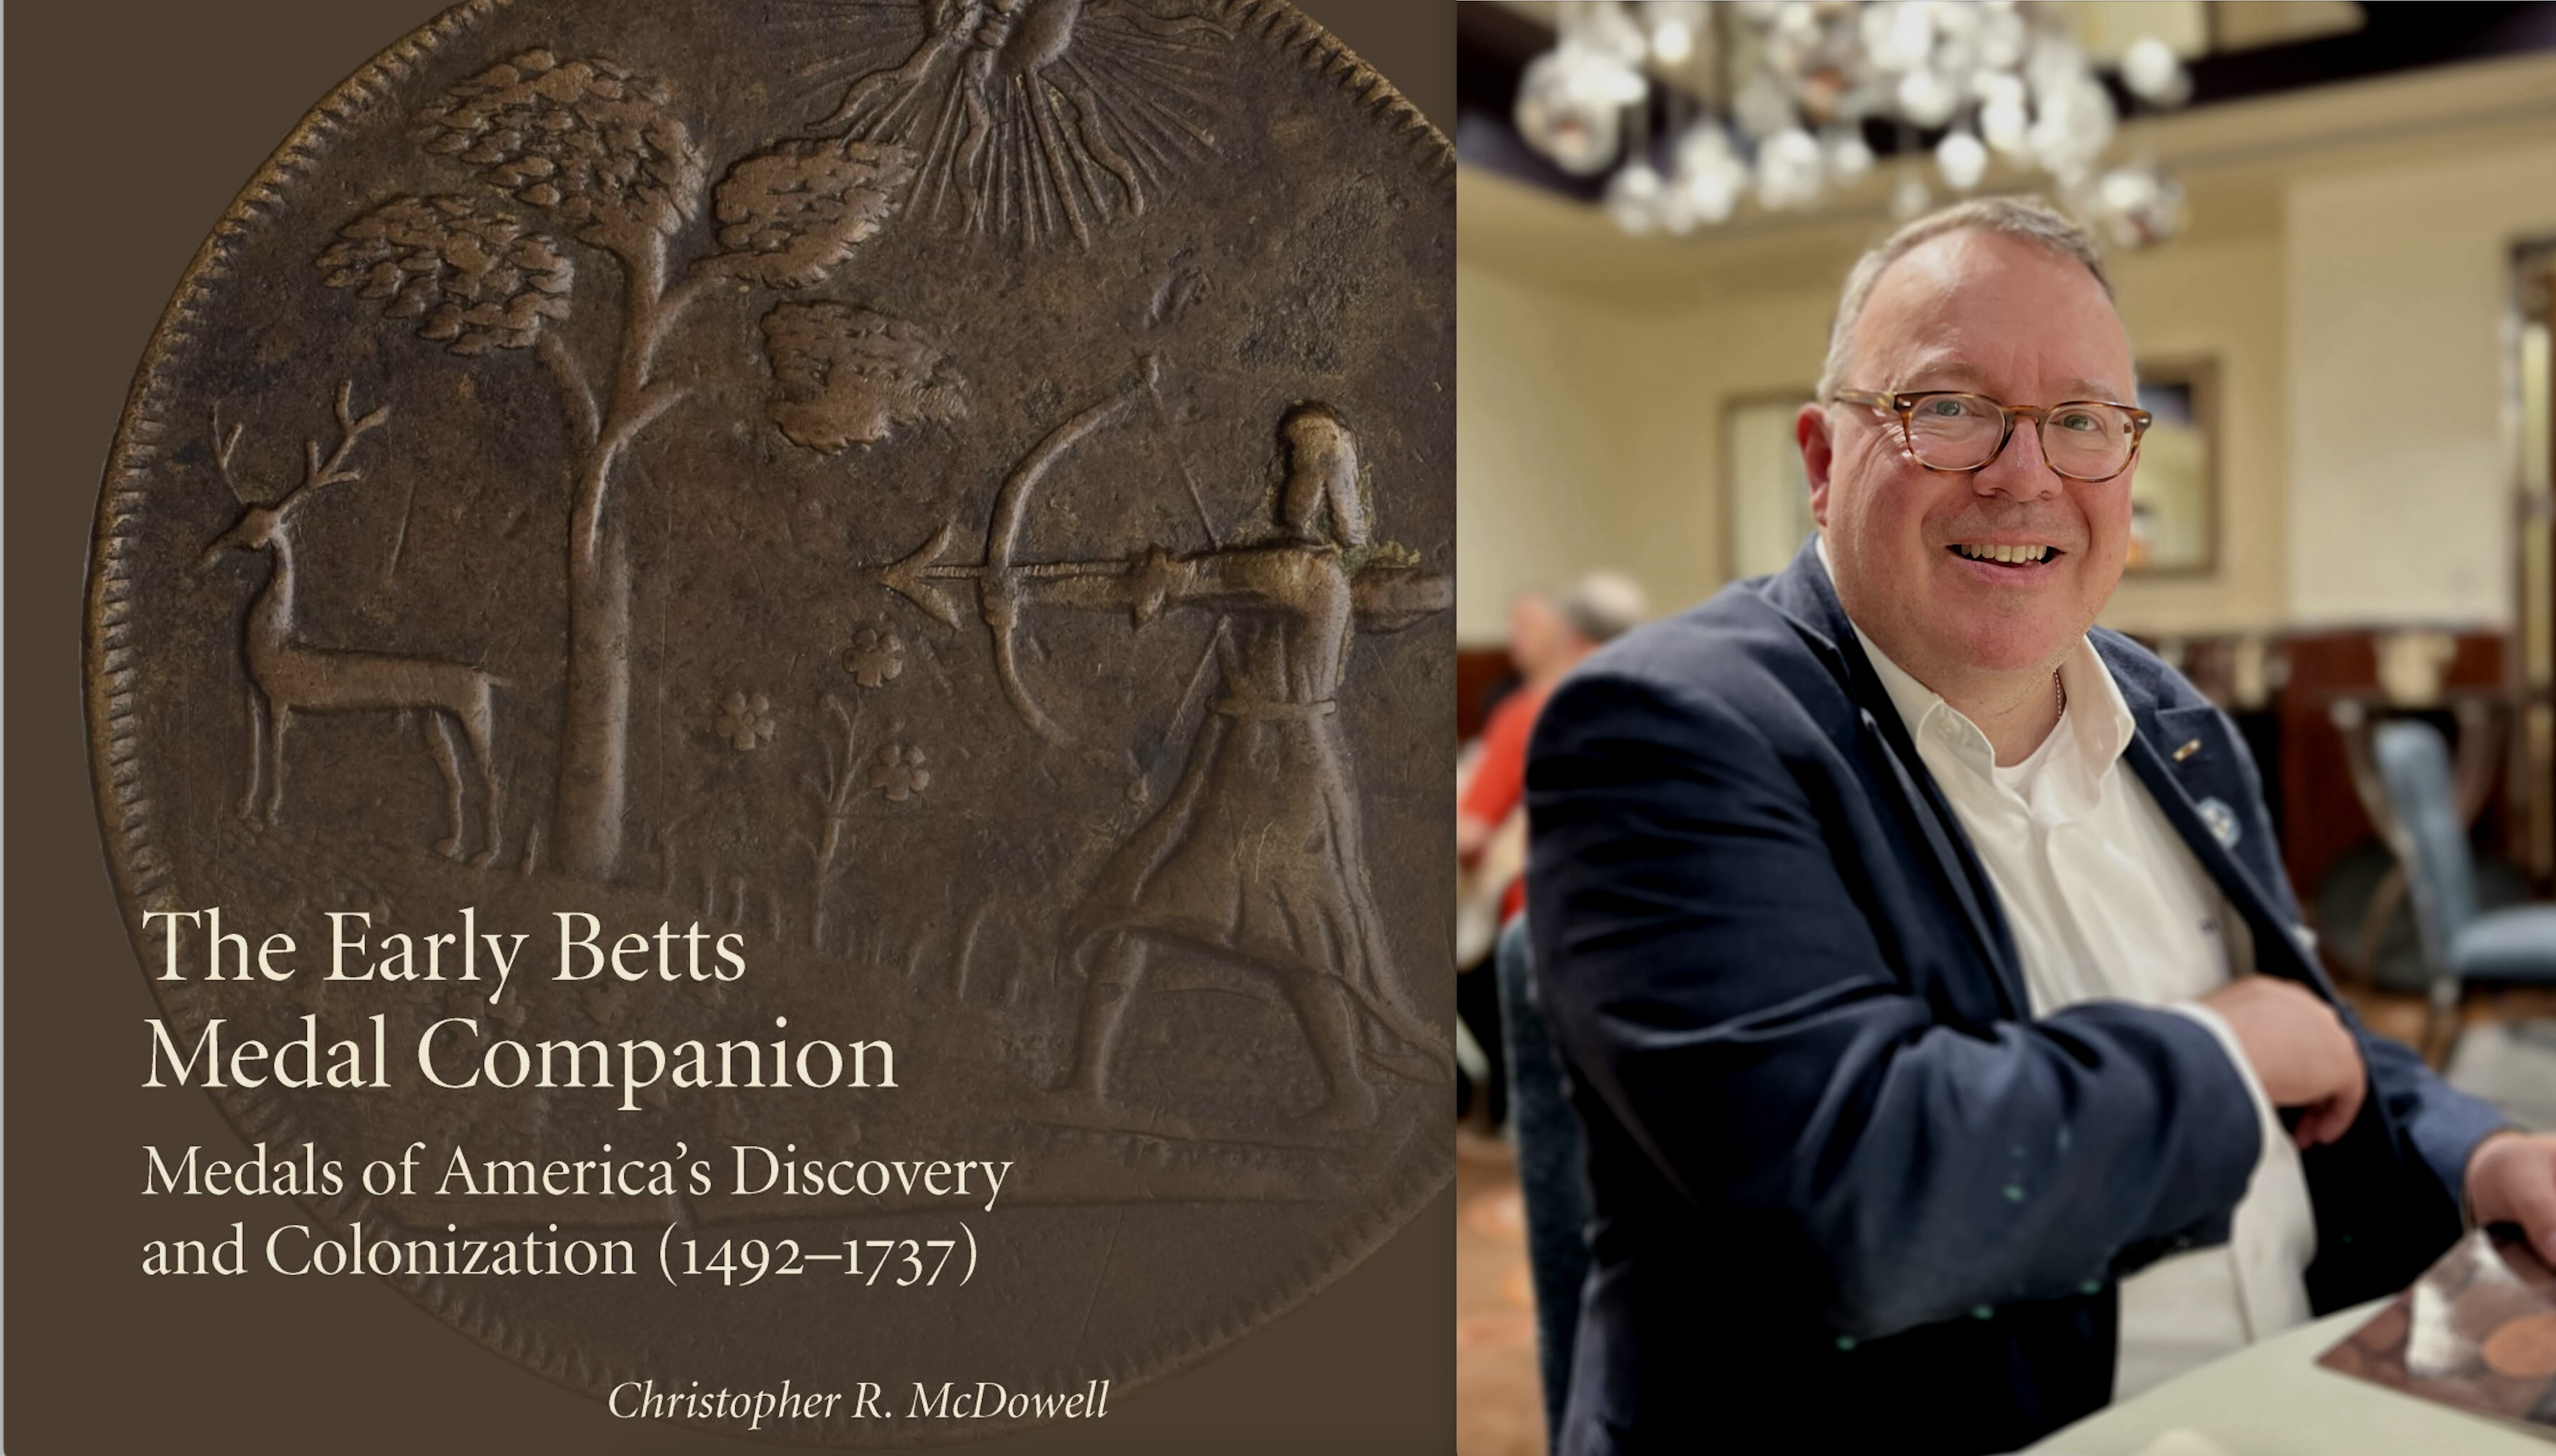 The Early Betts Medal Companion earns 3rd Prize at IAPN...